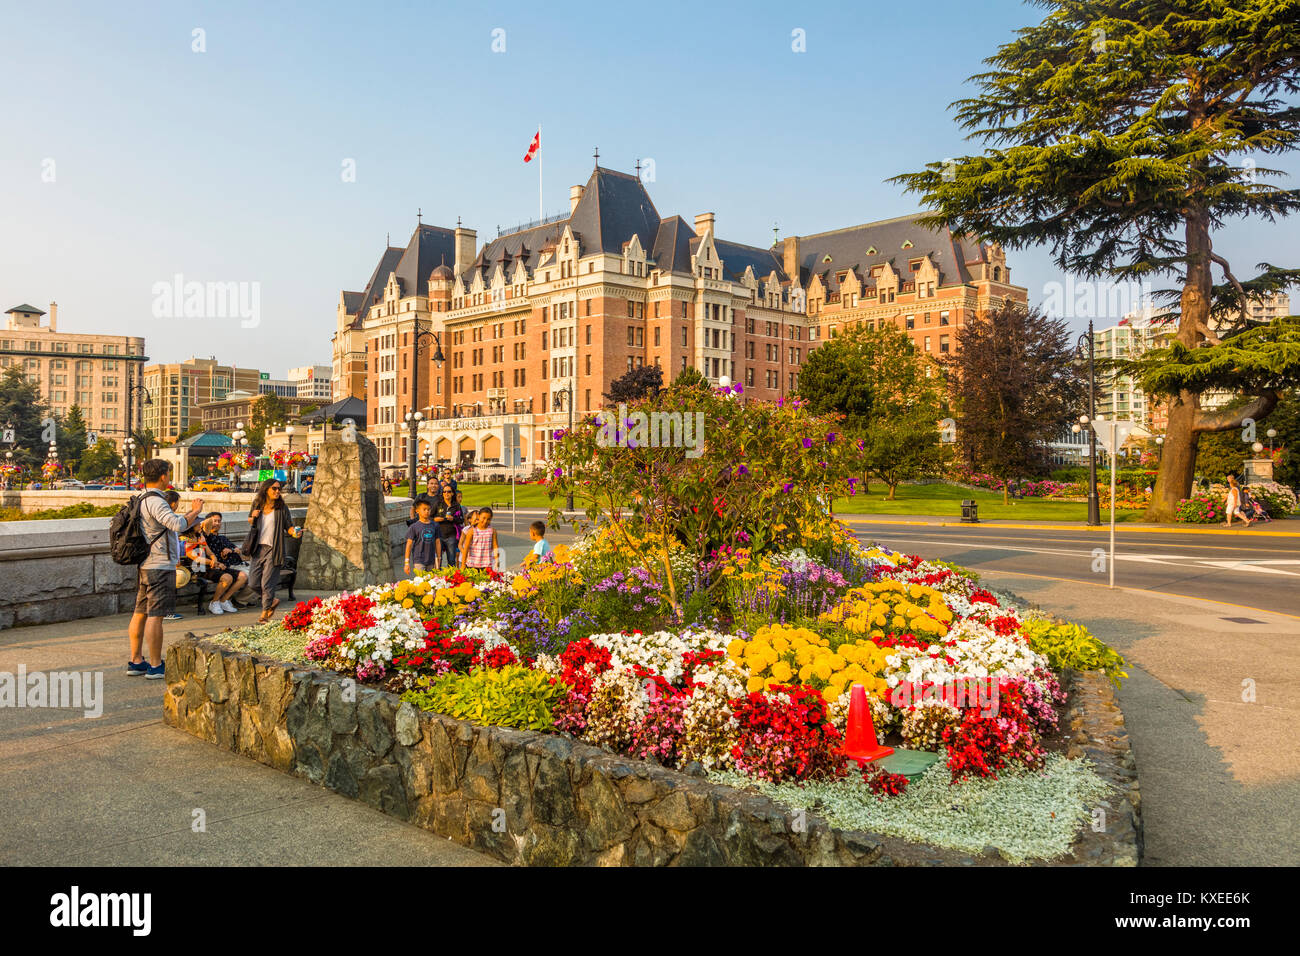 The Fairmont Empress Hotel In Victoria Known As The Garden City On